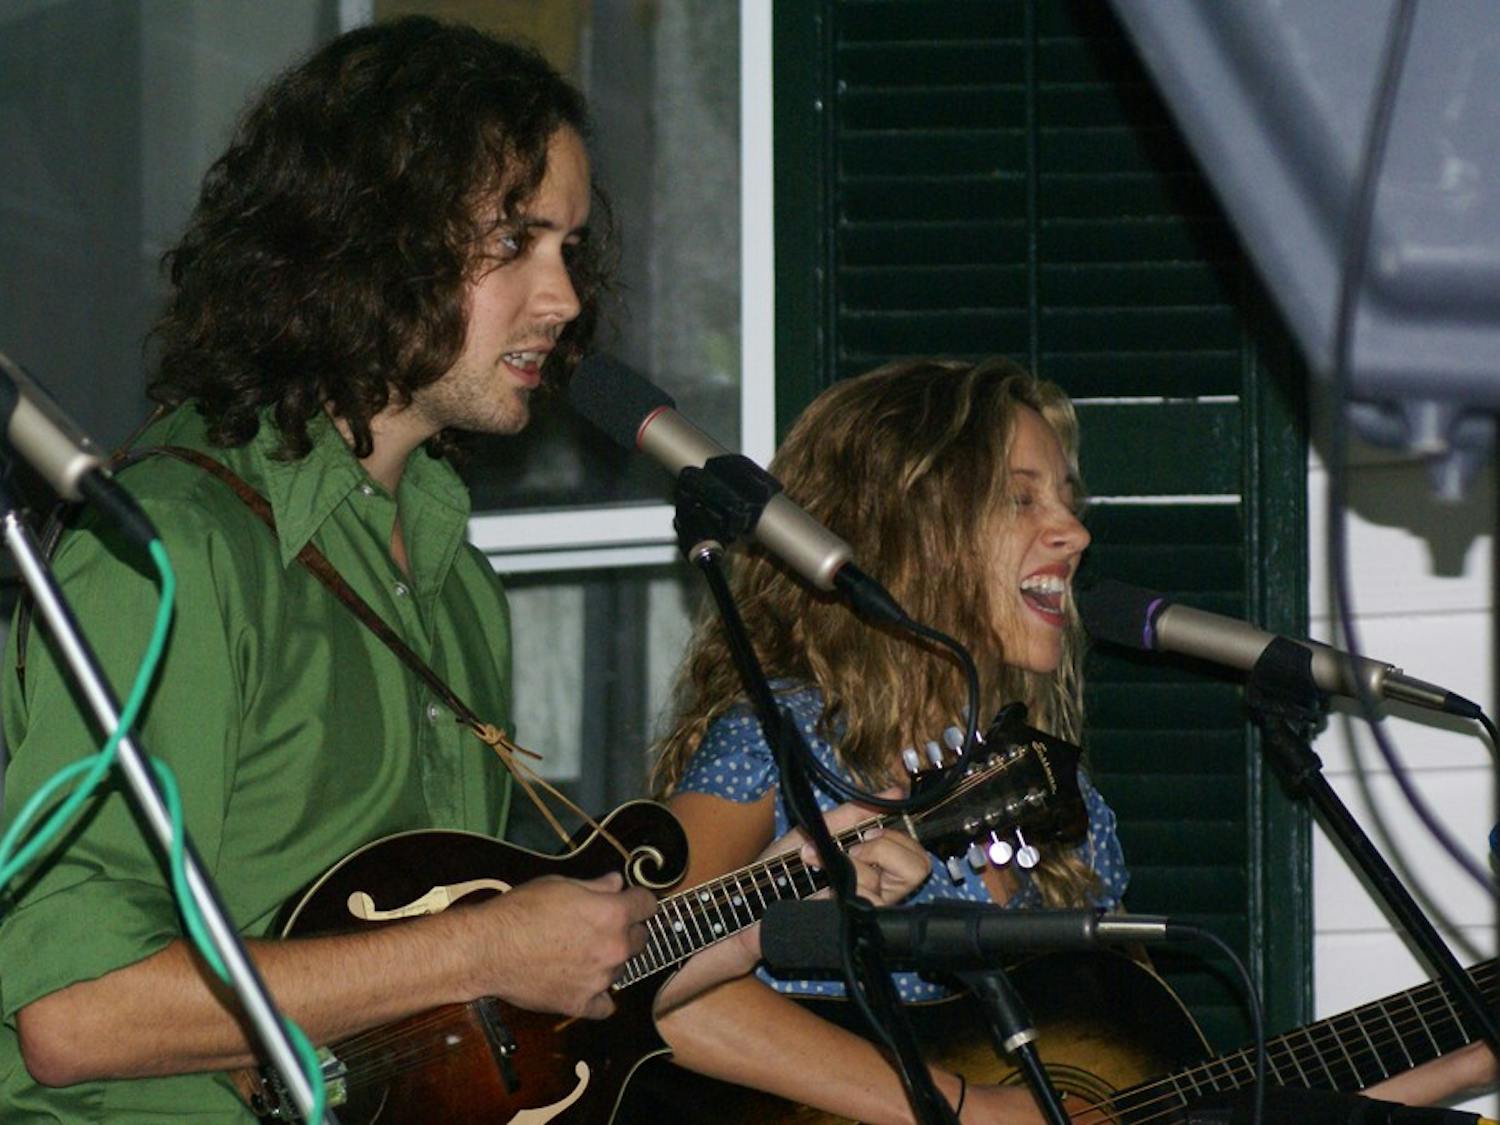 Andrew Marlin (left) and Emily Frantz (right), perform as Mandolin Orange at the Center for the Study of the American South Thursday.